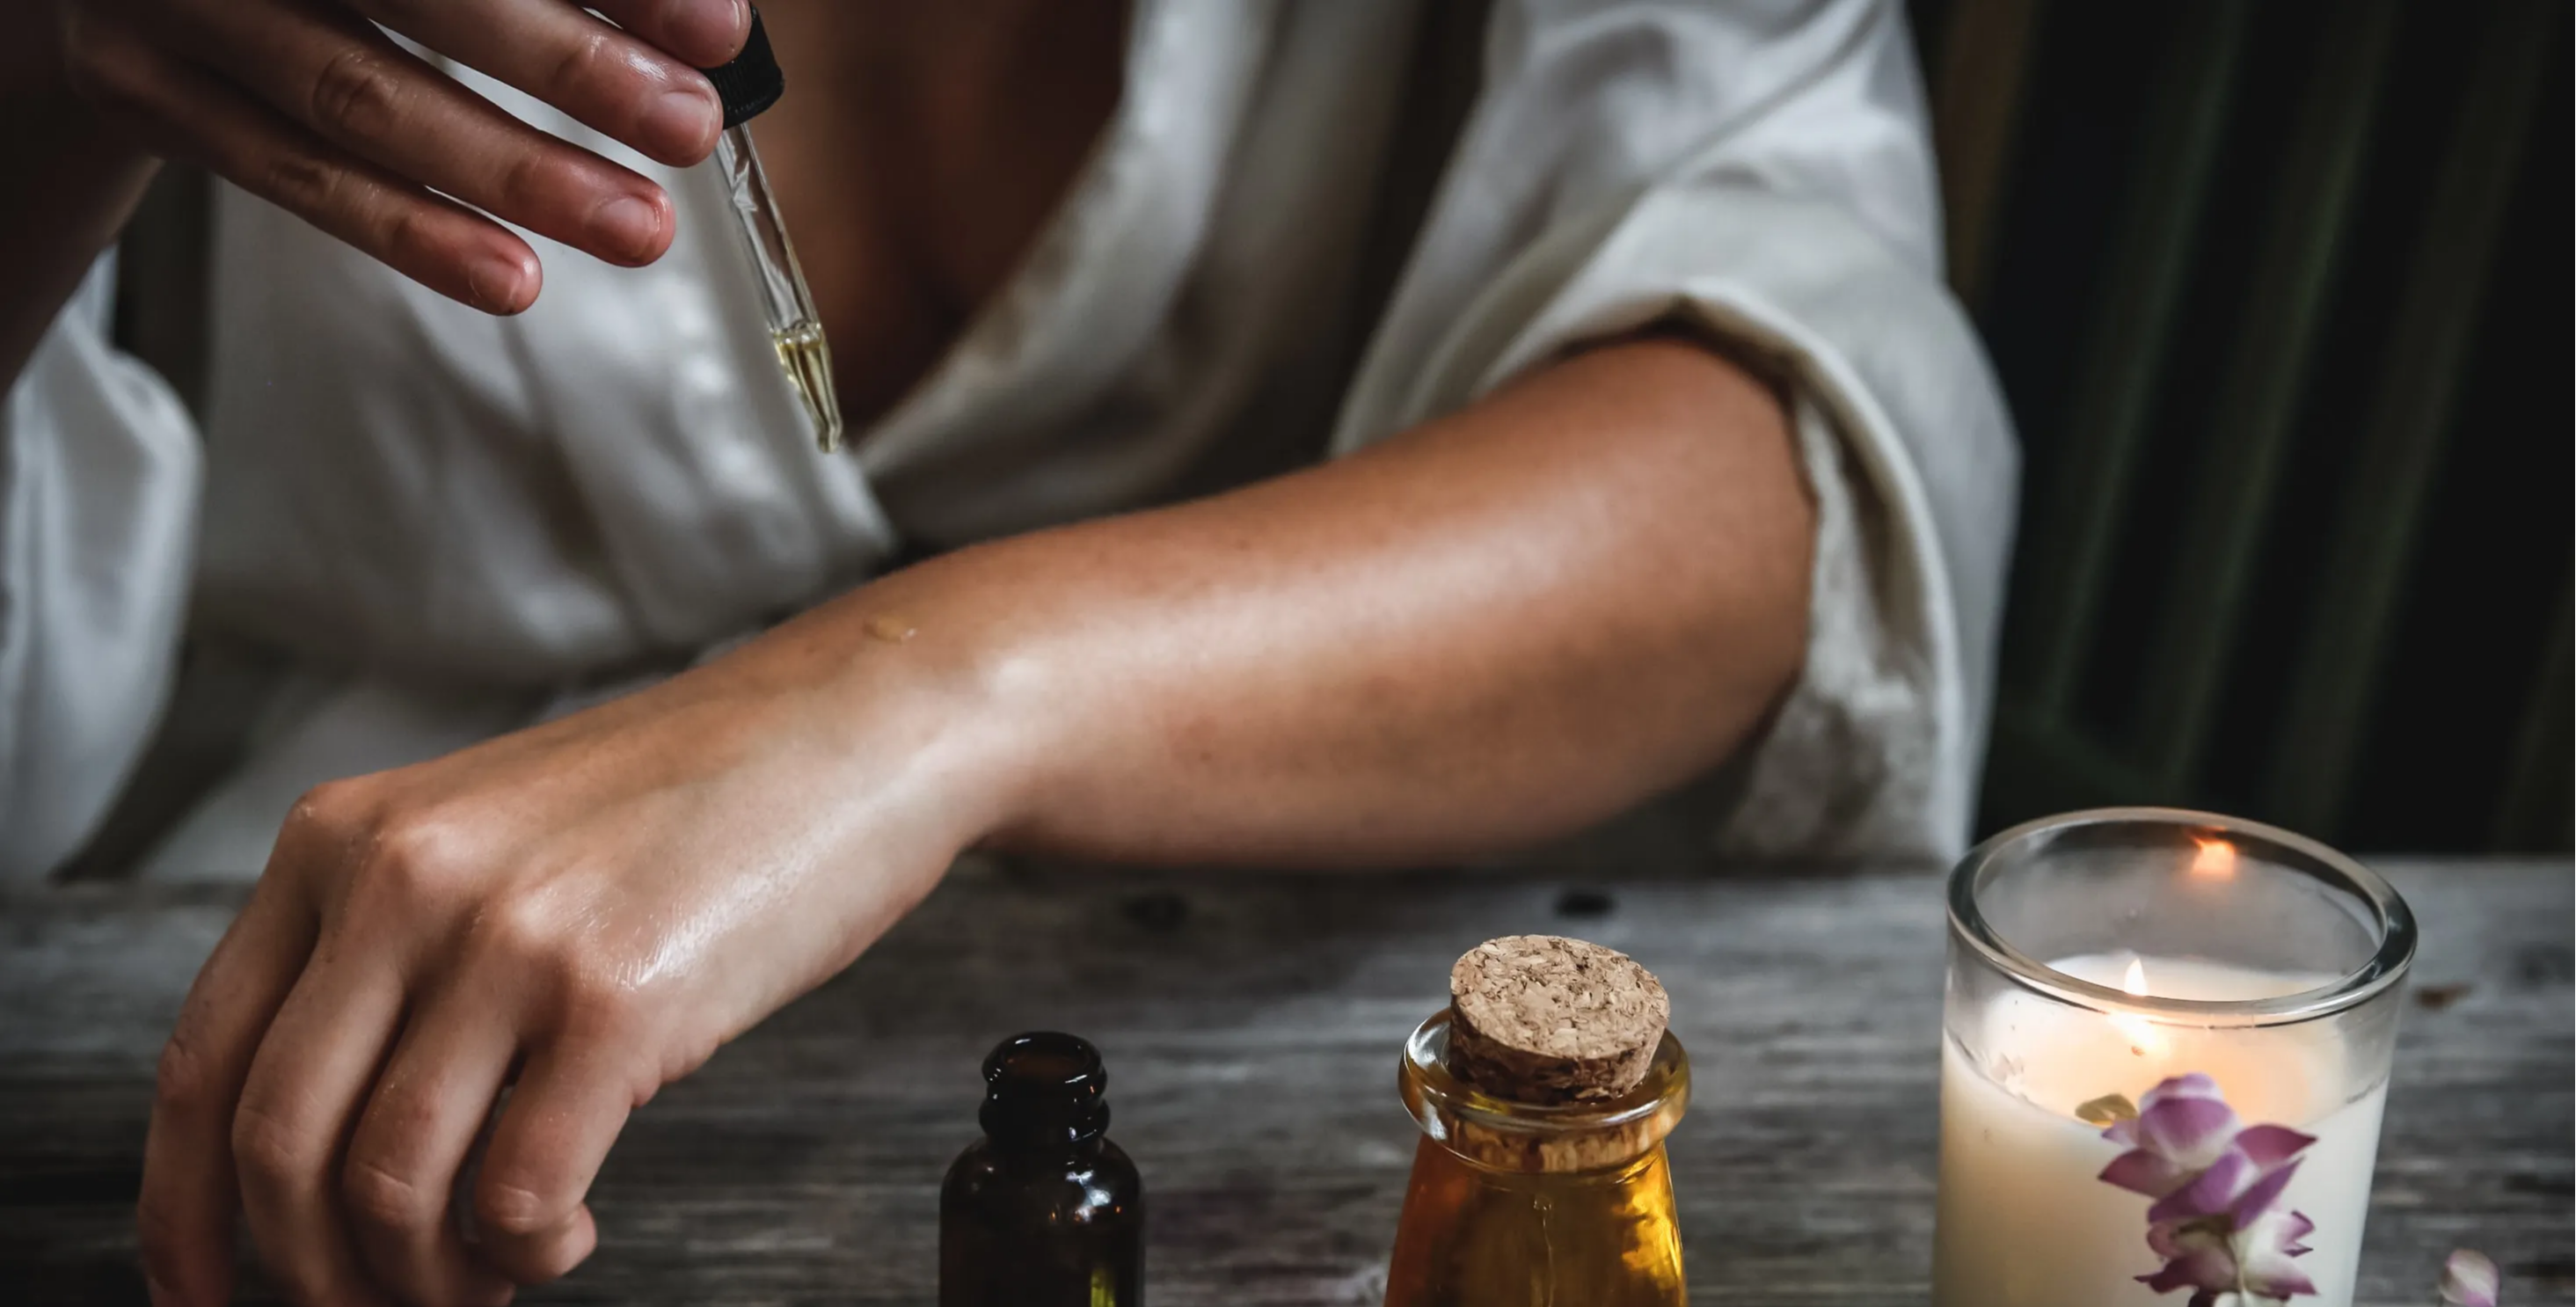 Which Essential Oils Are Good For Your Skin? – JUARA Skincare